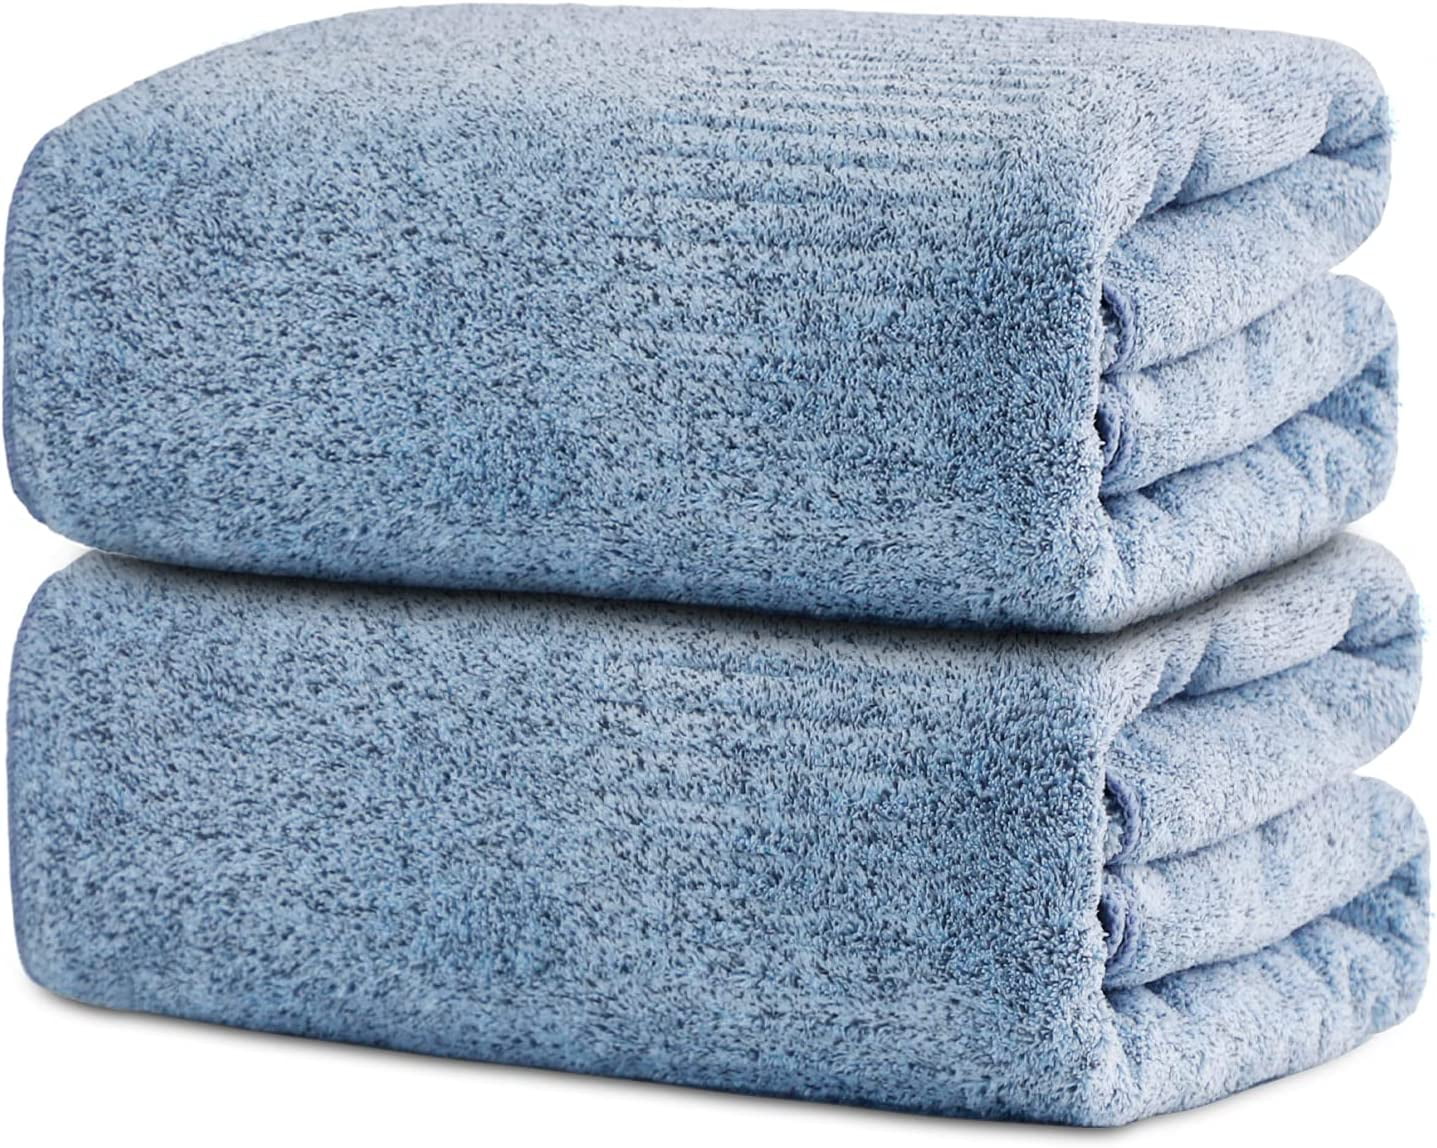 SEISSO Large Bath Towels for Bathroom, 35 x 63 inches Viscose Made from  Bamboo Bath Sheets, Family Dorm Super Soft Jumboo Towel Set for Fitness,  Sports, Pool, Spa, Gym, Travel, Light Blue(2